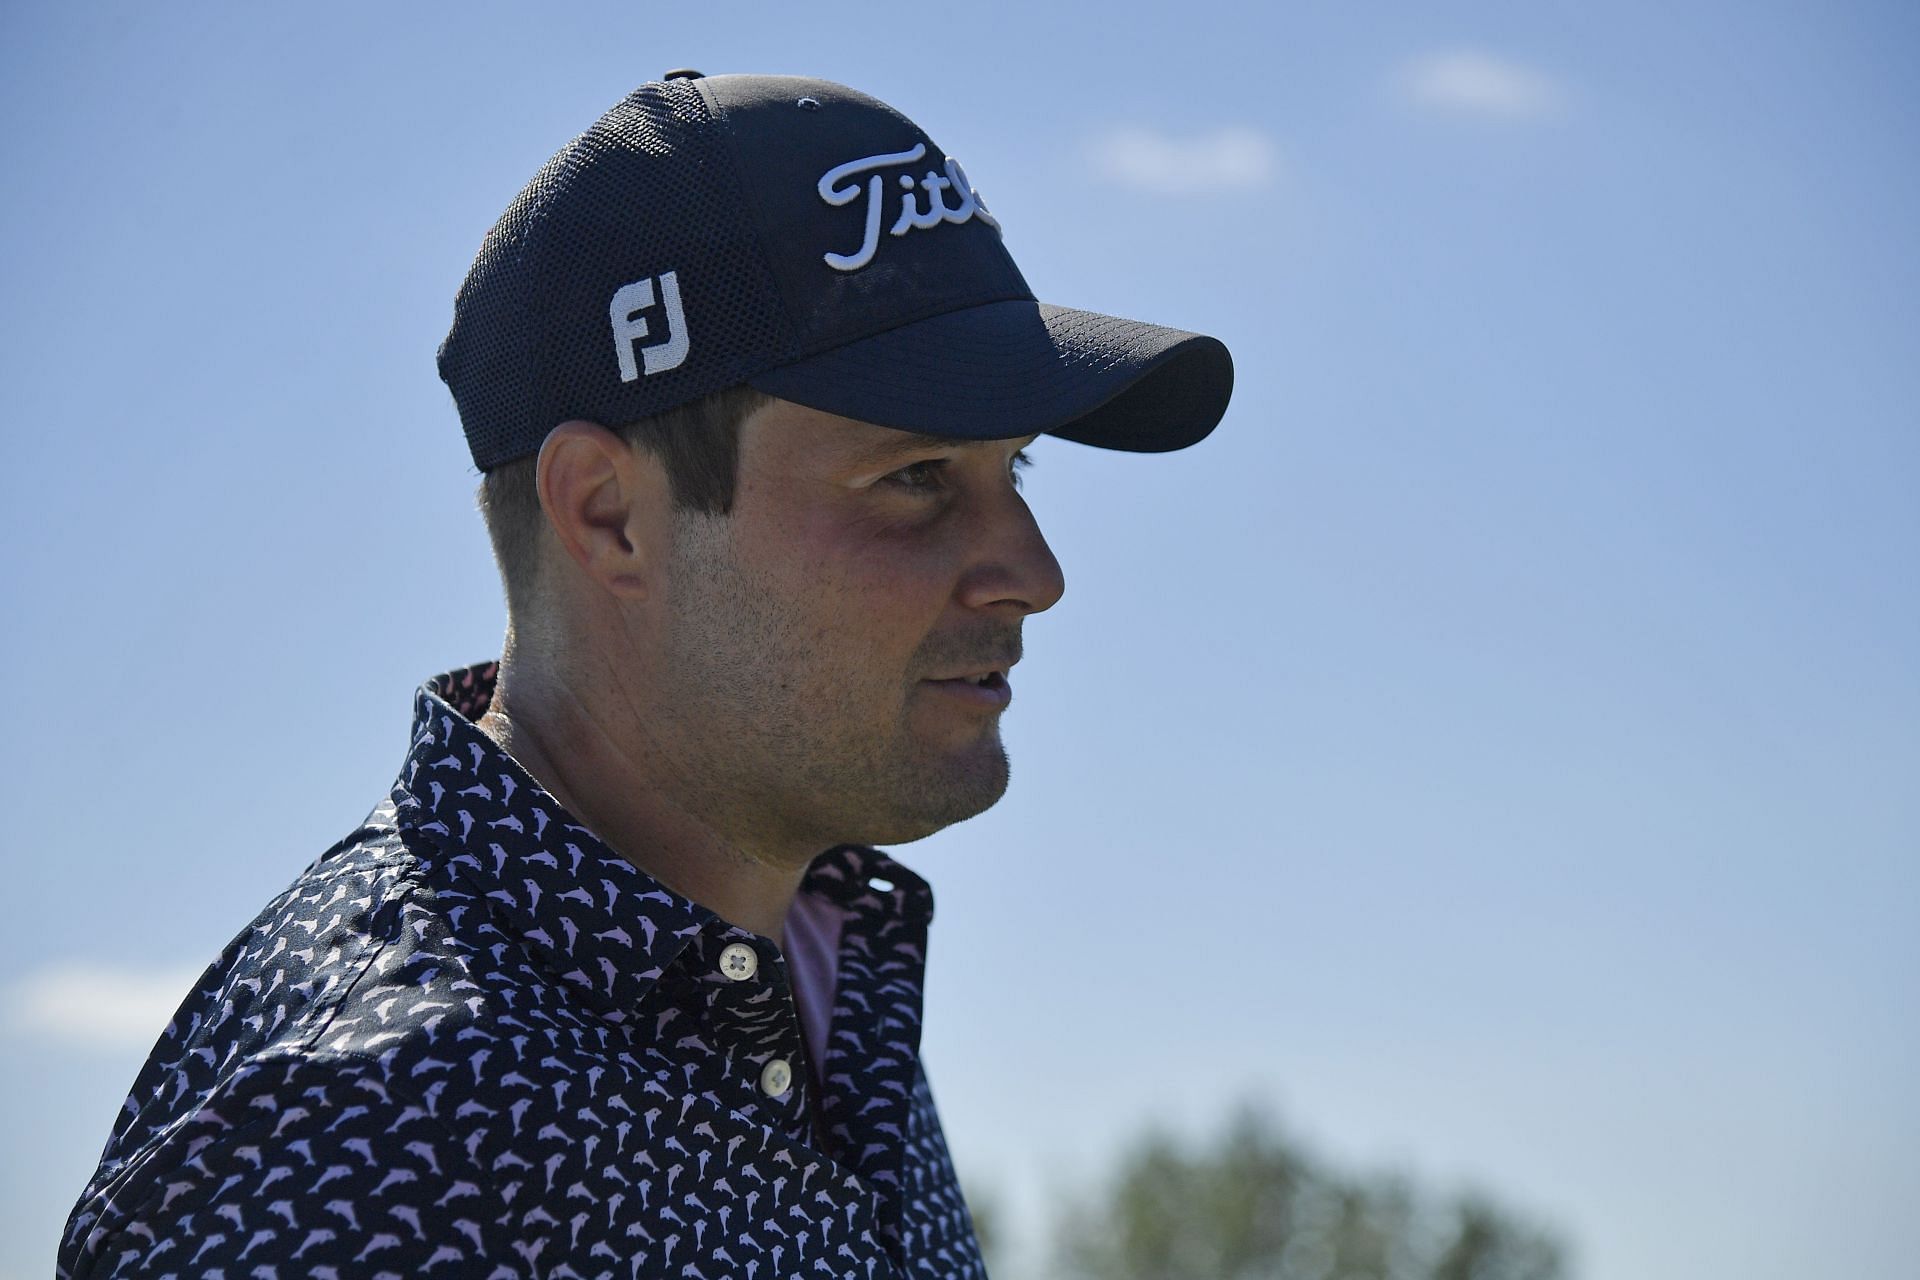 Peter Uihlein at the LIV Golf Invitational - Chicago - Day Three (Image via Quinn Harris/Getty Images)